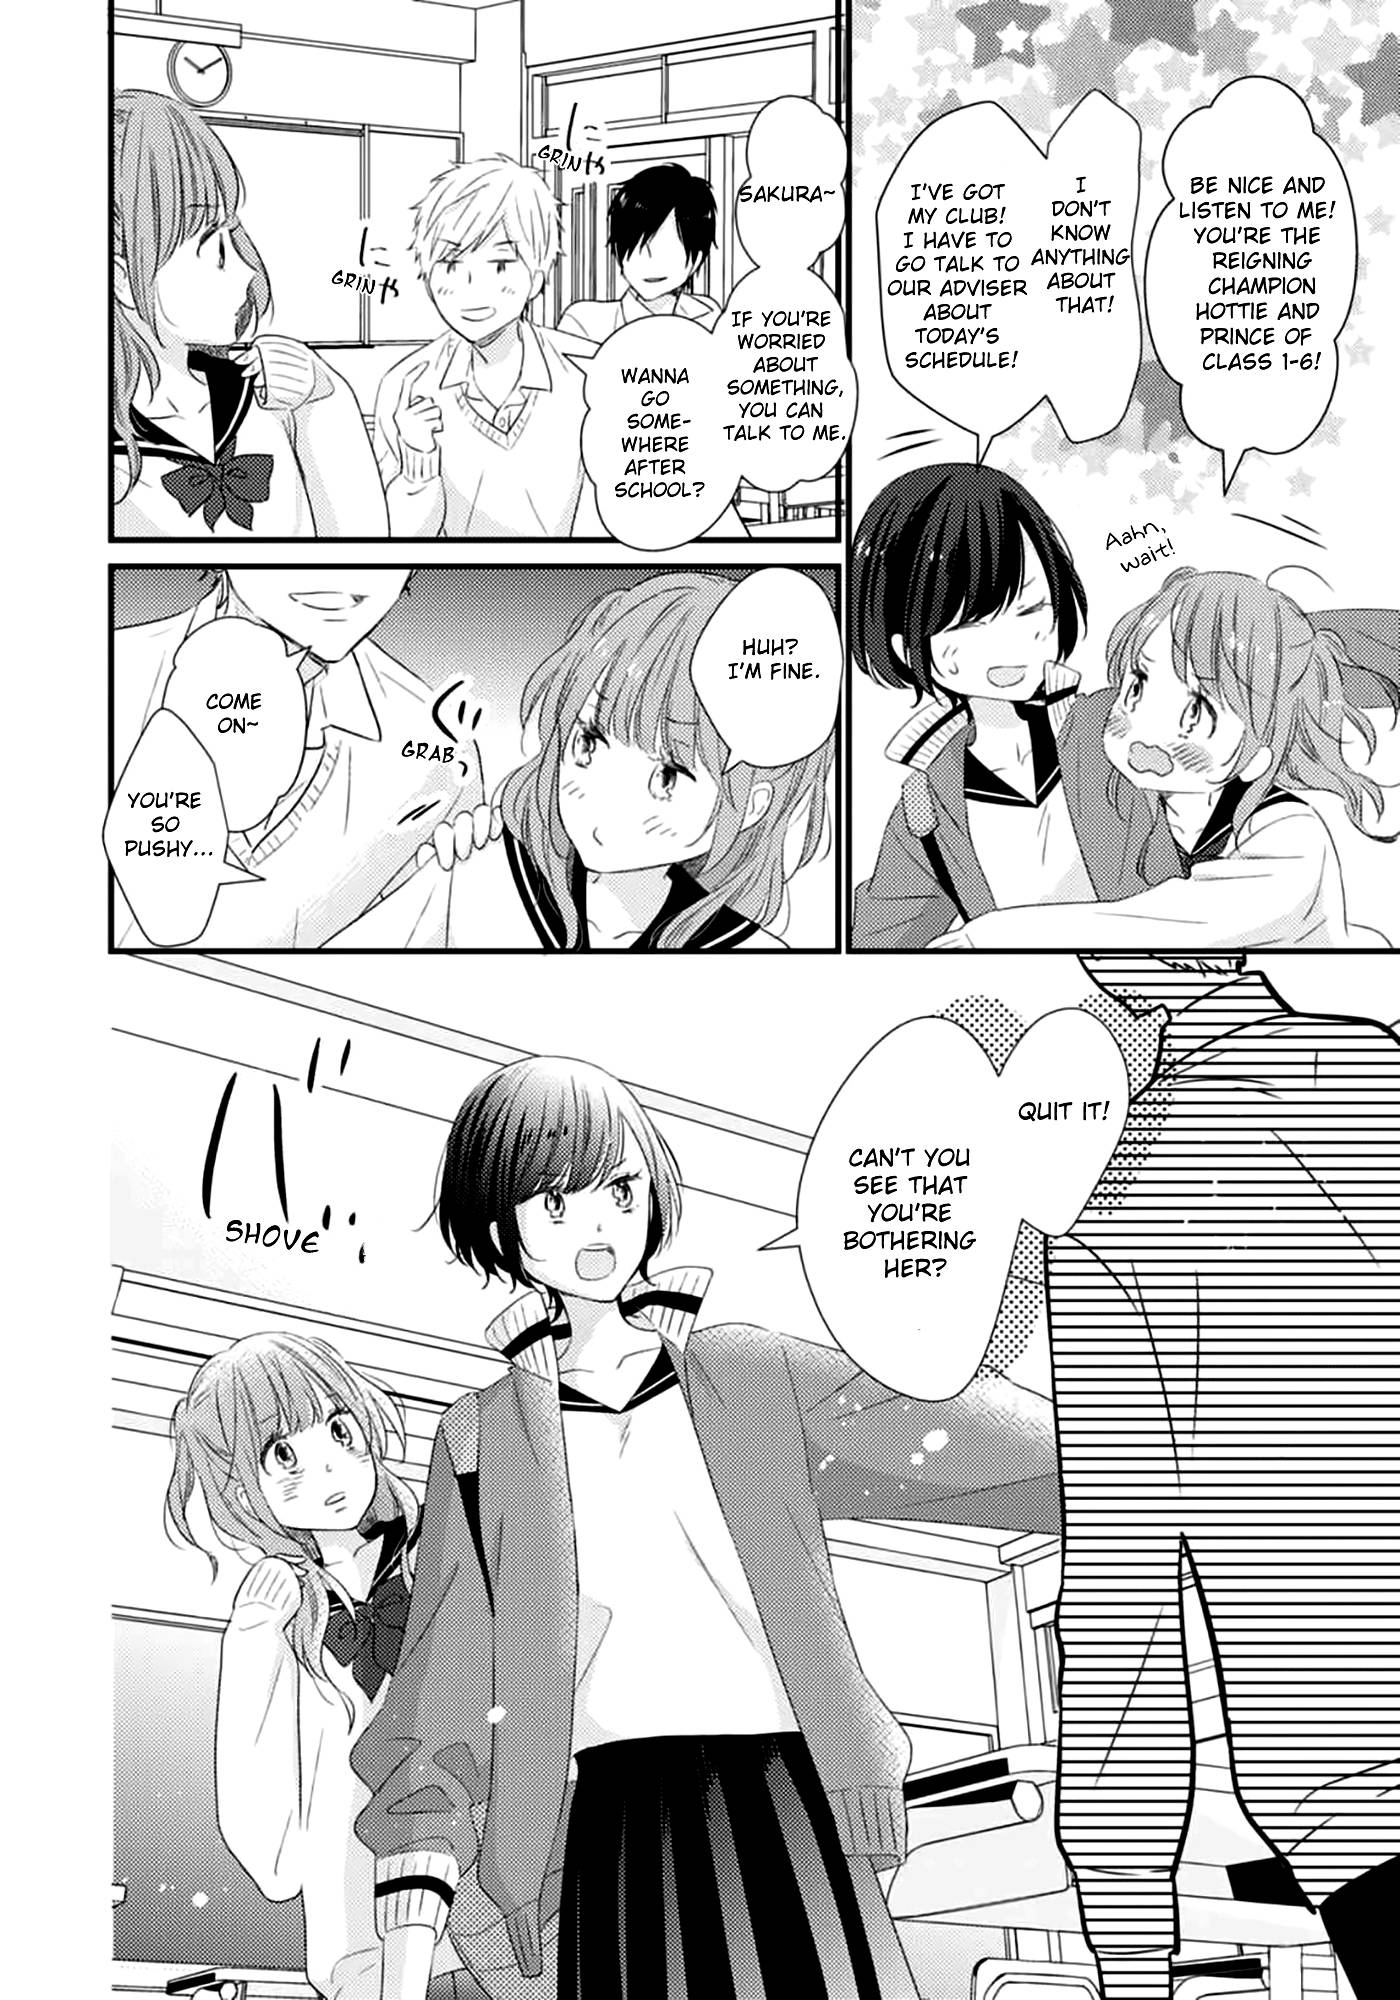 I Don't Know Why, But I Suddenly Wanted To Have Sex With My Coworker Who Sits Next To Me - chapter 2 - #6